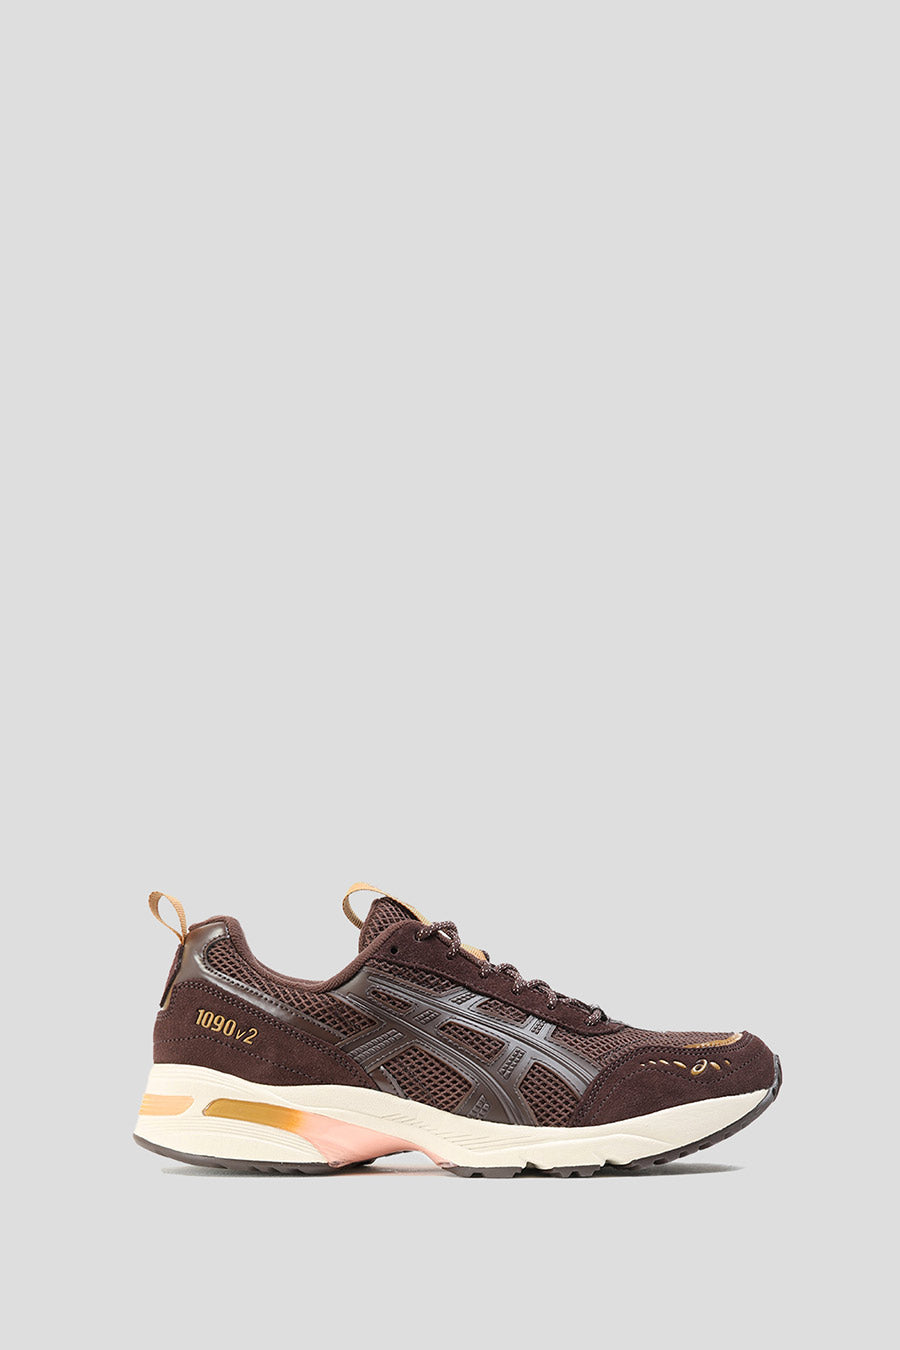 Asics - SNEAKERS GEL-1090V2 COFFEE - LE LABO STORE